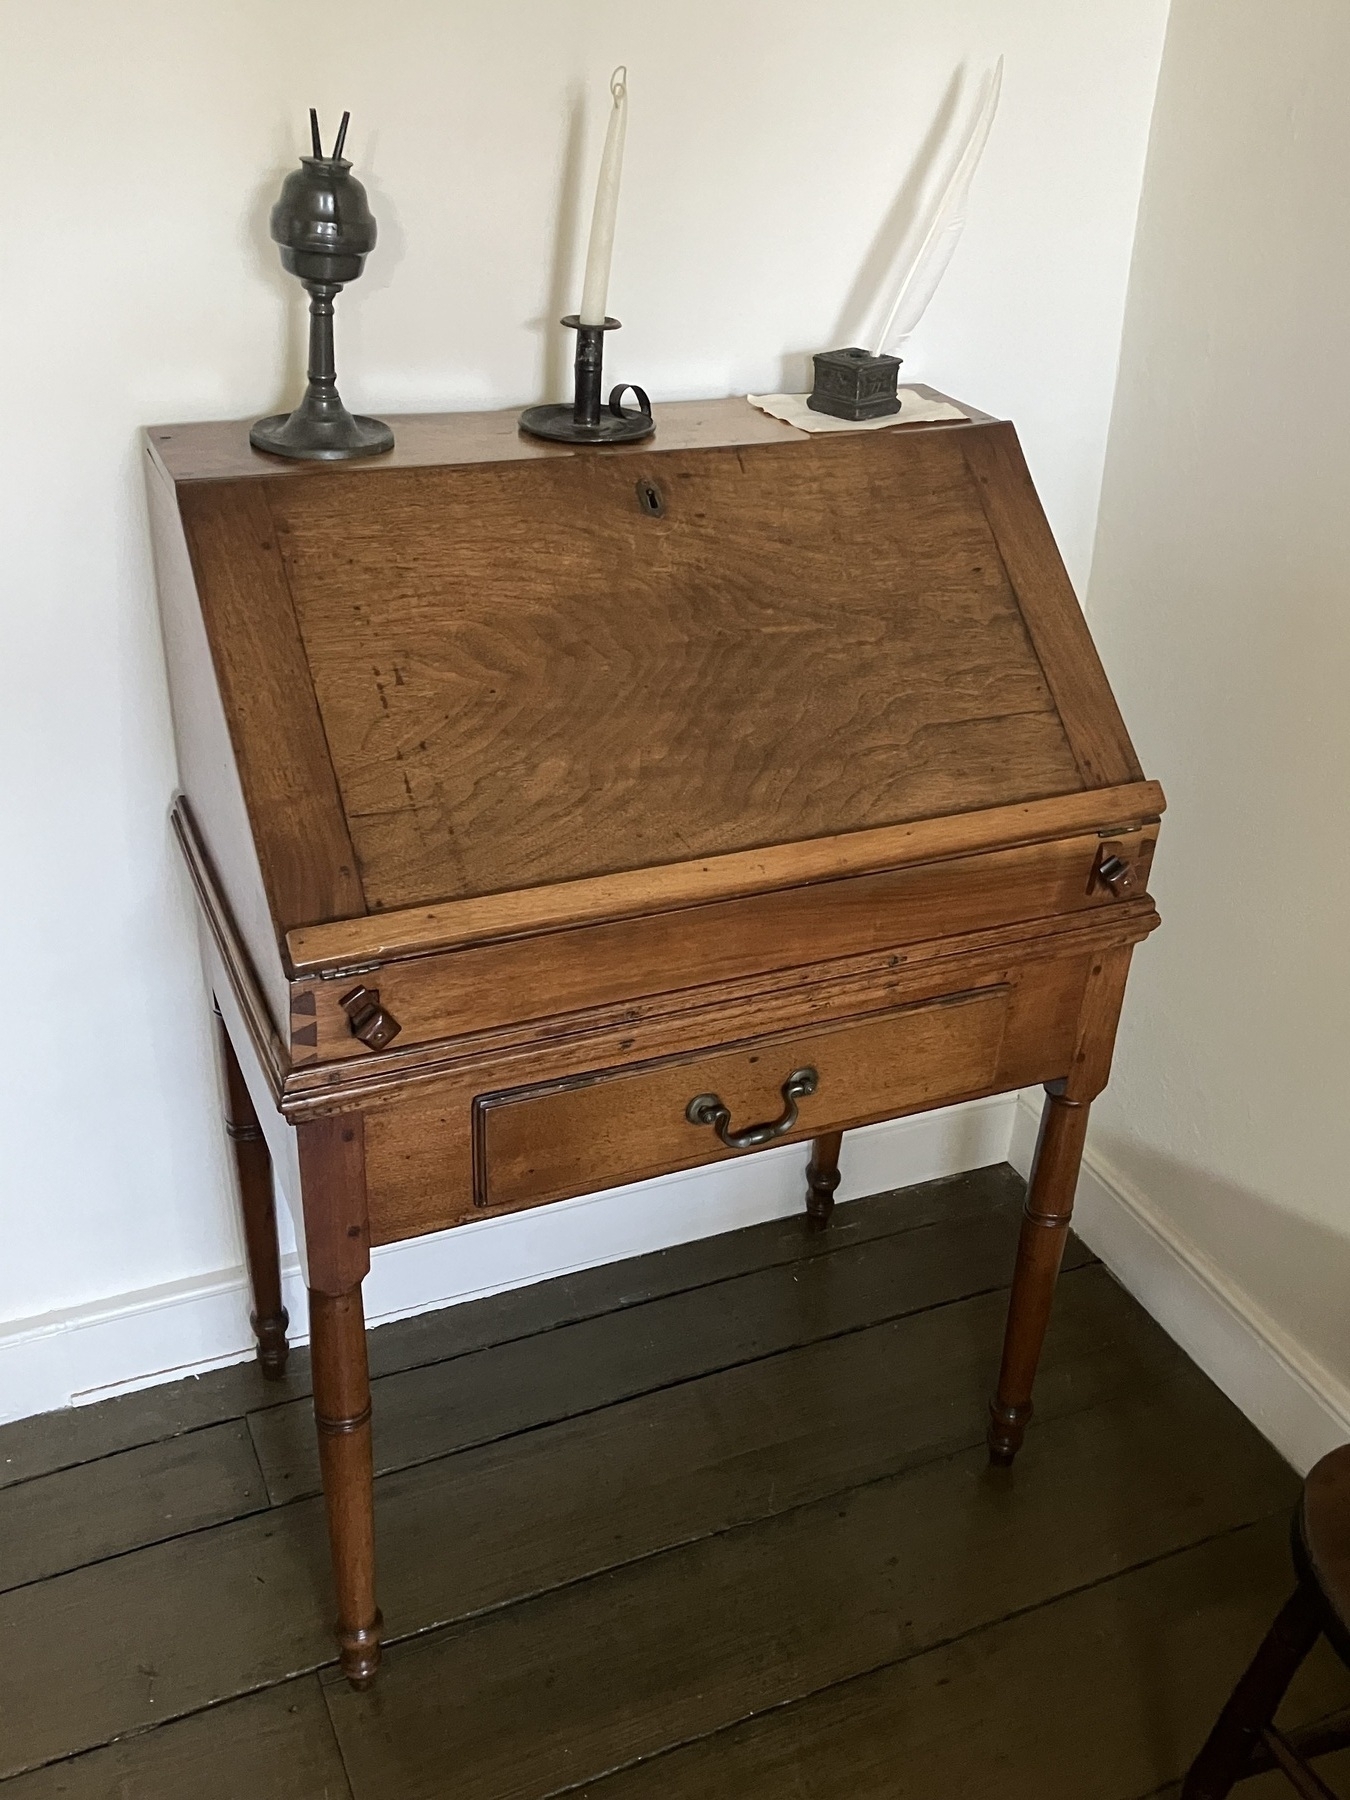 Auto-generated description: A vintage wooden writing desk with a slanted lid, a drawer below, and two candlesticks and an inkwell on top.